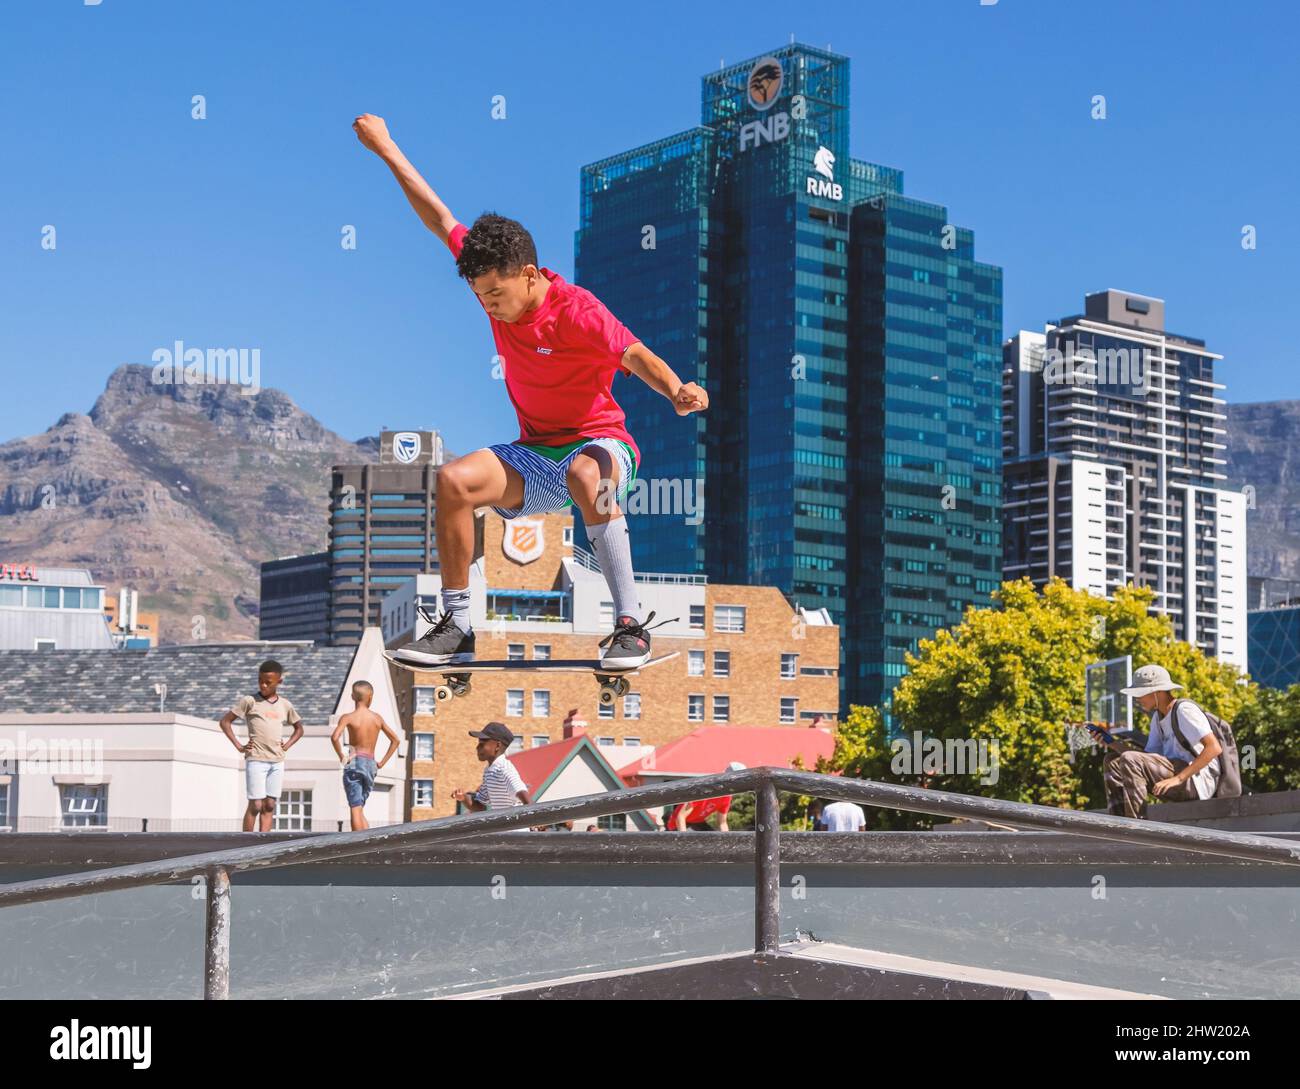 Cape Town, South Africa, 26th February - 2022: Man rides skateboard in air with city centre as backdrop. Stock Photo